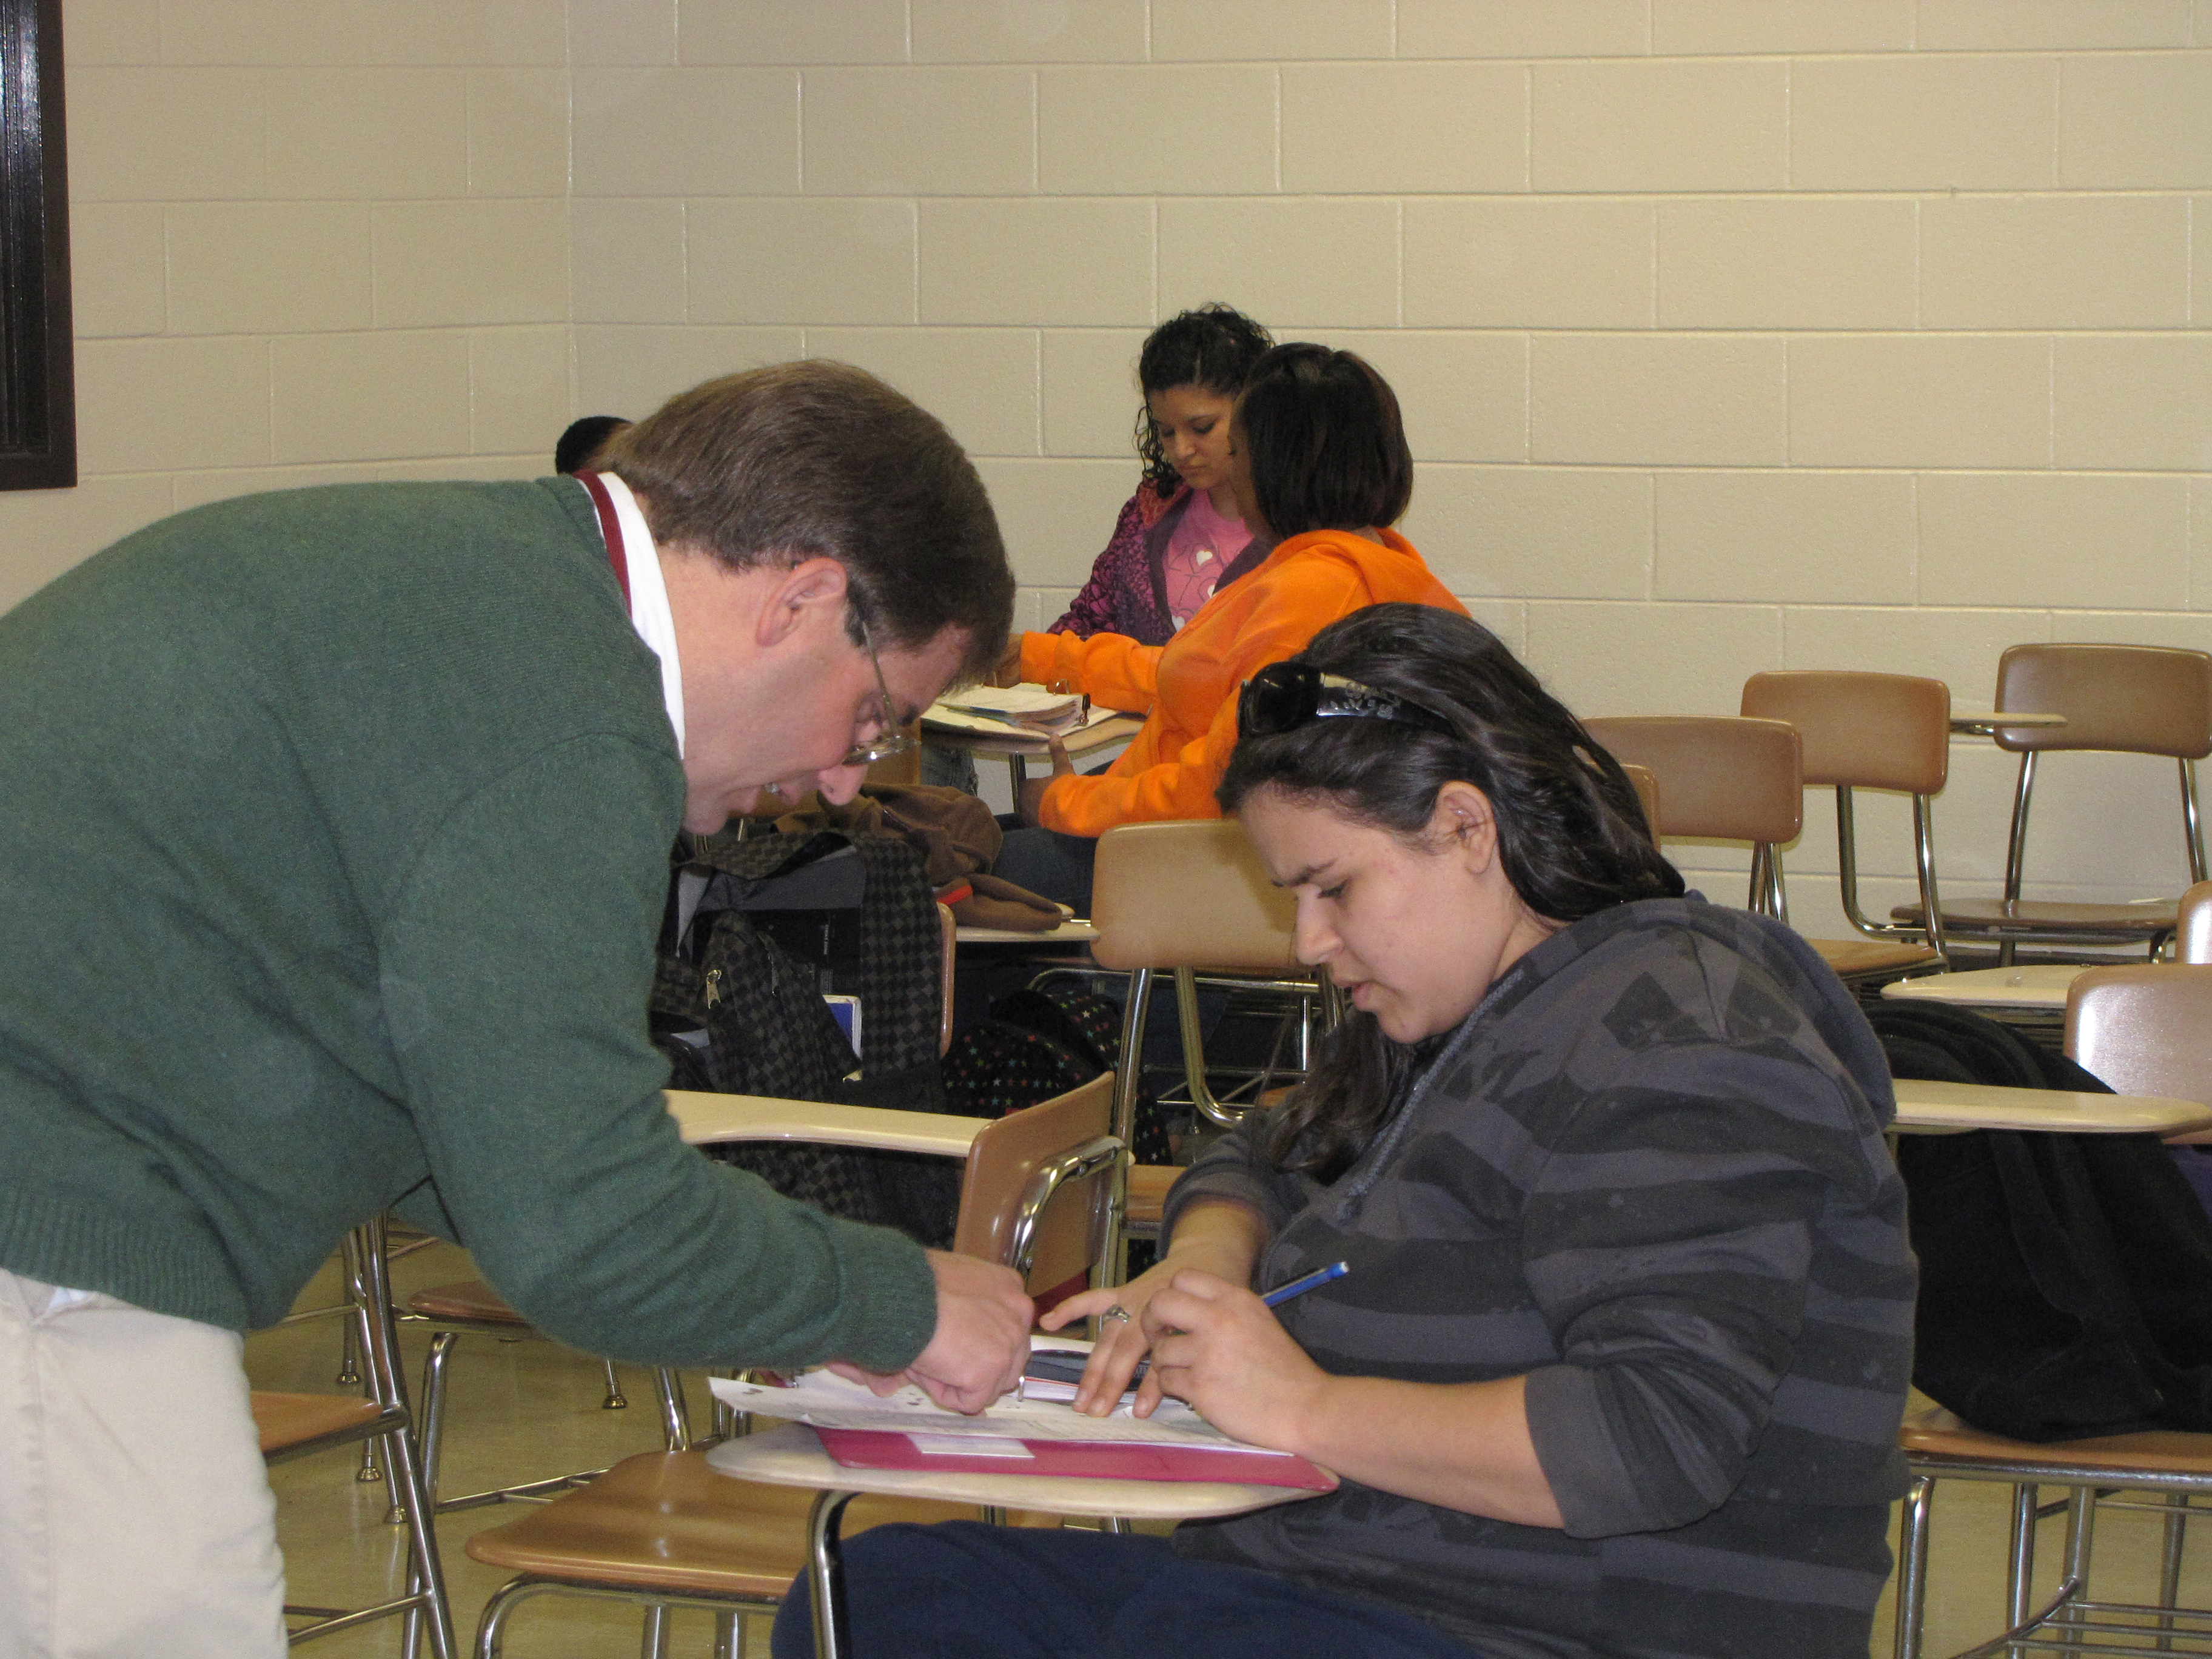 A tutor counsels a student at an Upward Bound session.